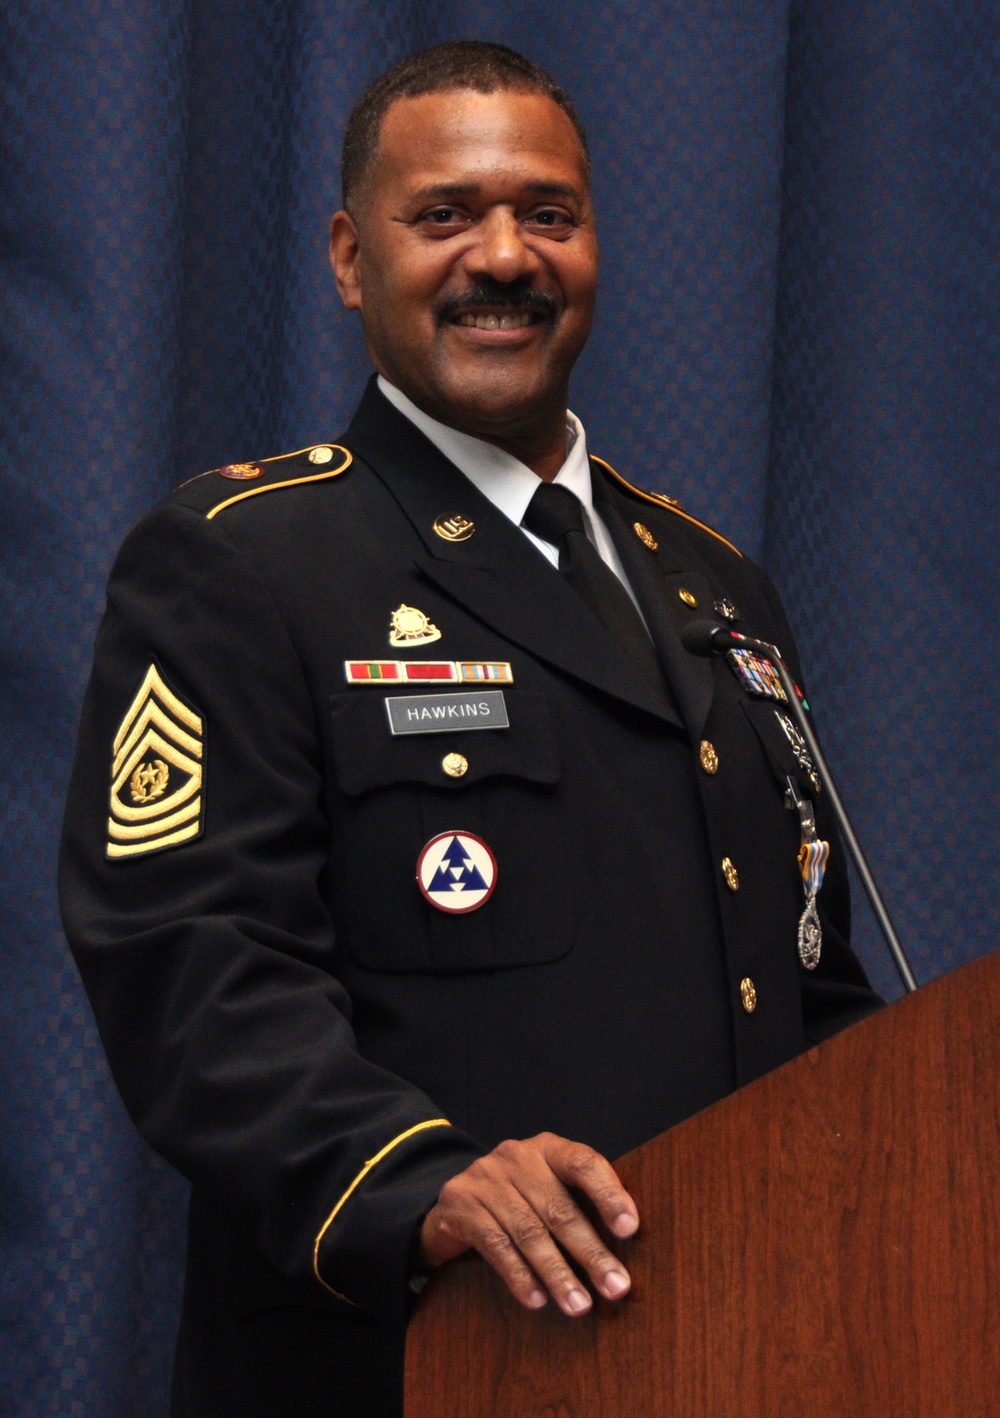 Former U.S. Transportation Command senior enlisted leader emphasized integrity, others first, and teamwork during a more than three-decade Army career